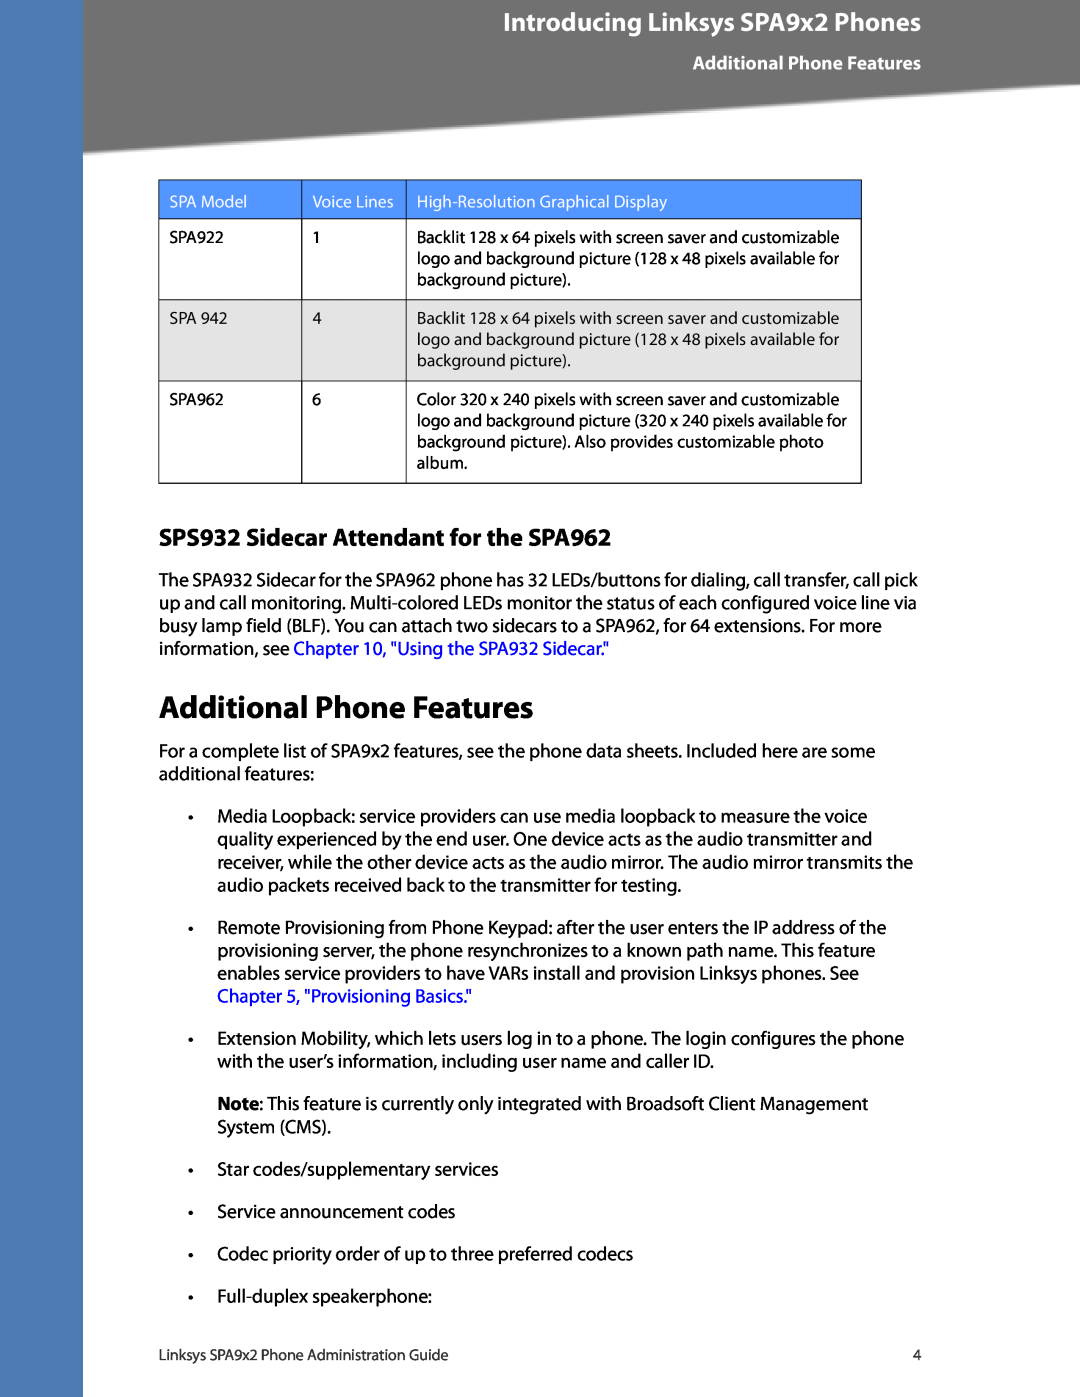 Linksys SPA922 manual Additional Phone Features, SPS932 Sidecar Attendant for the SPA962, Introducing Linksys SPA9x2 Phones 